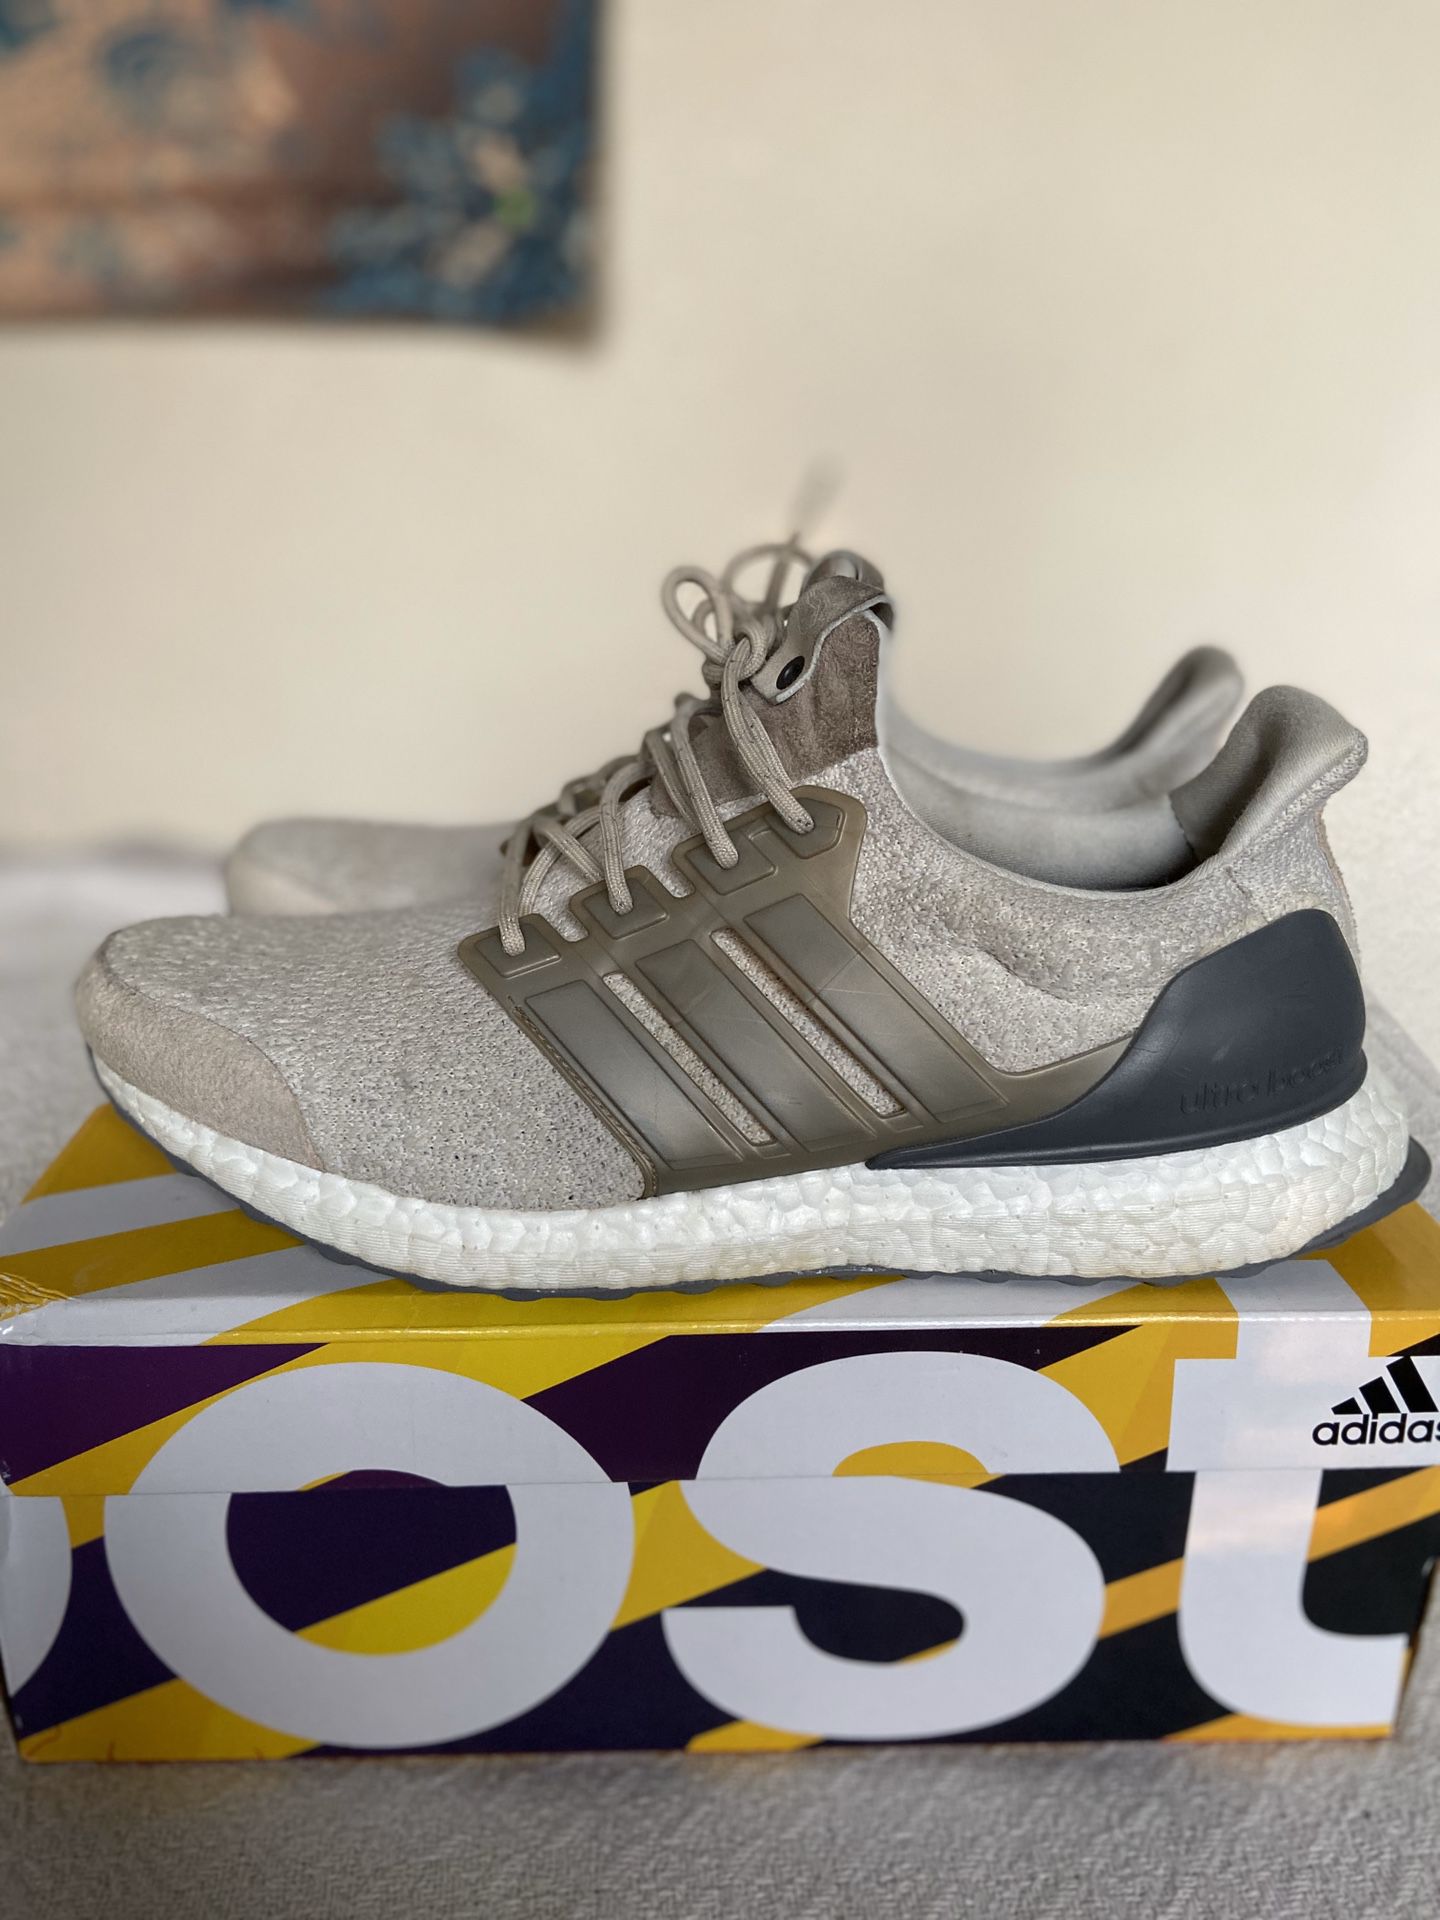 Adidas Ultra Boost Lux Consortium SNS Size 10